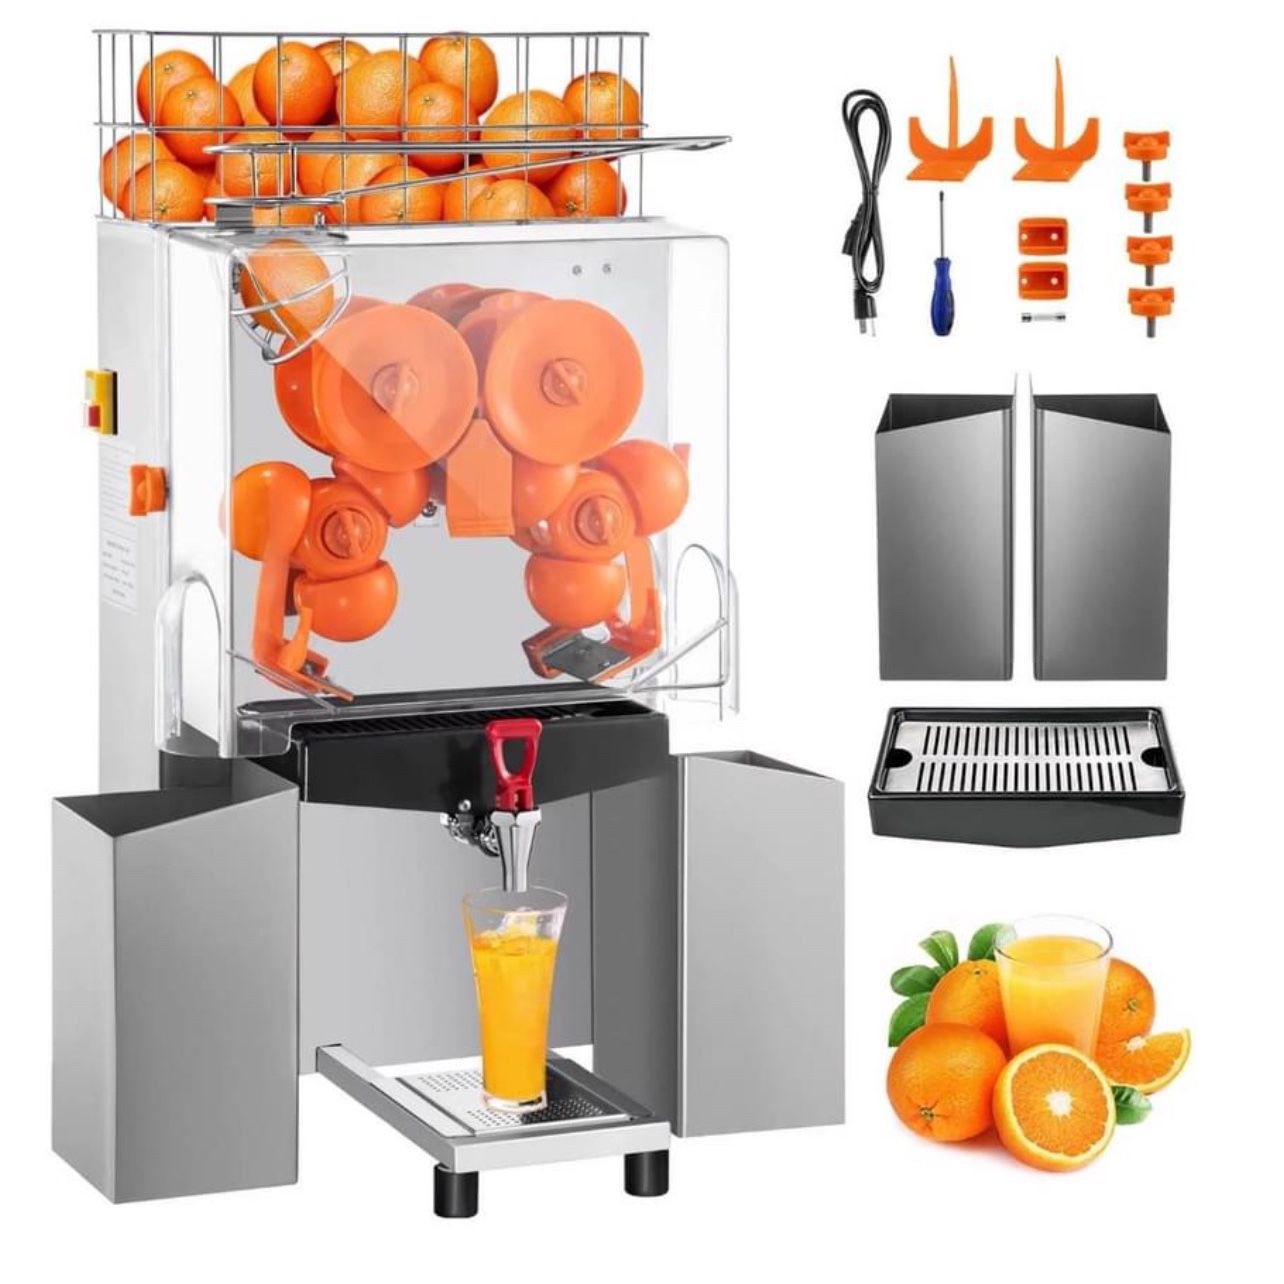 Juicer Machine with a Water Tap Orange Juice Machine with Pull-Out Filter Box Commercial Orange Juicer 25-35 Oranges Per Minute, New In Box